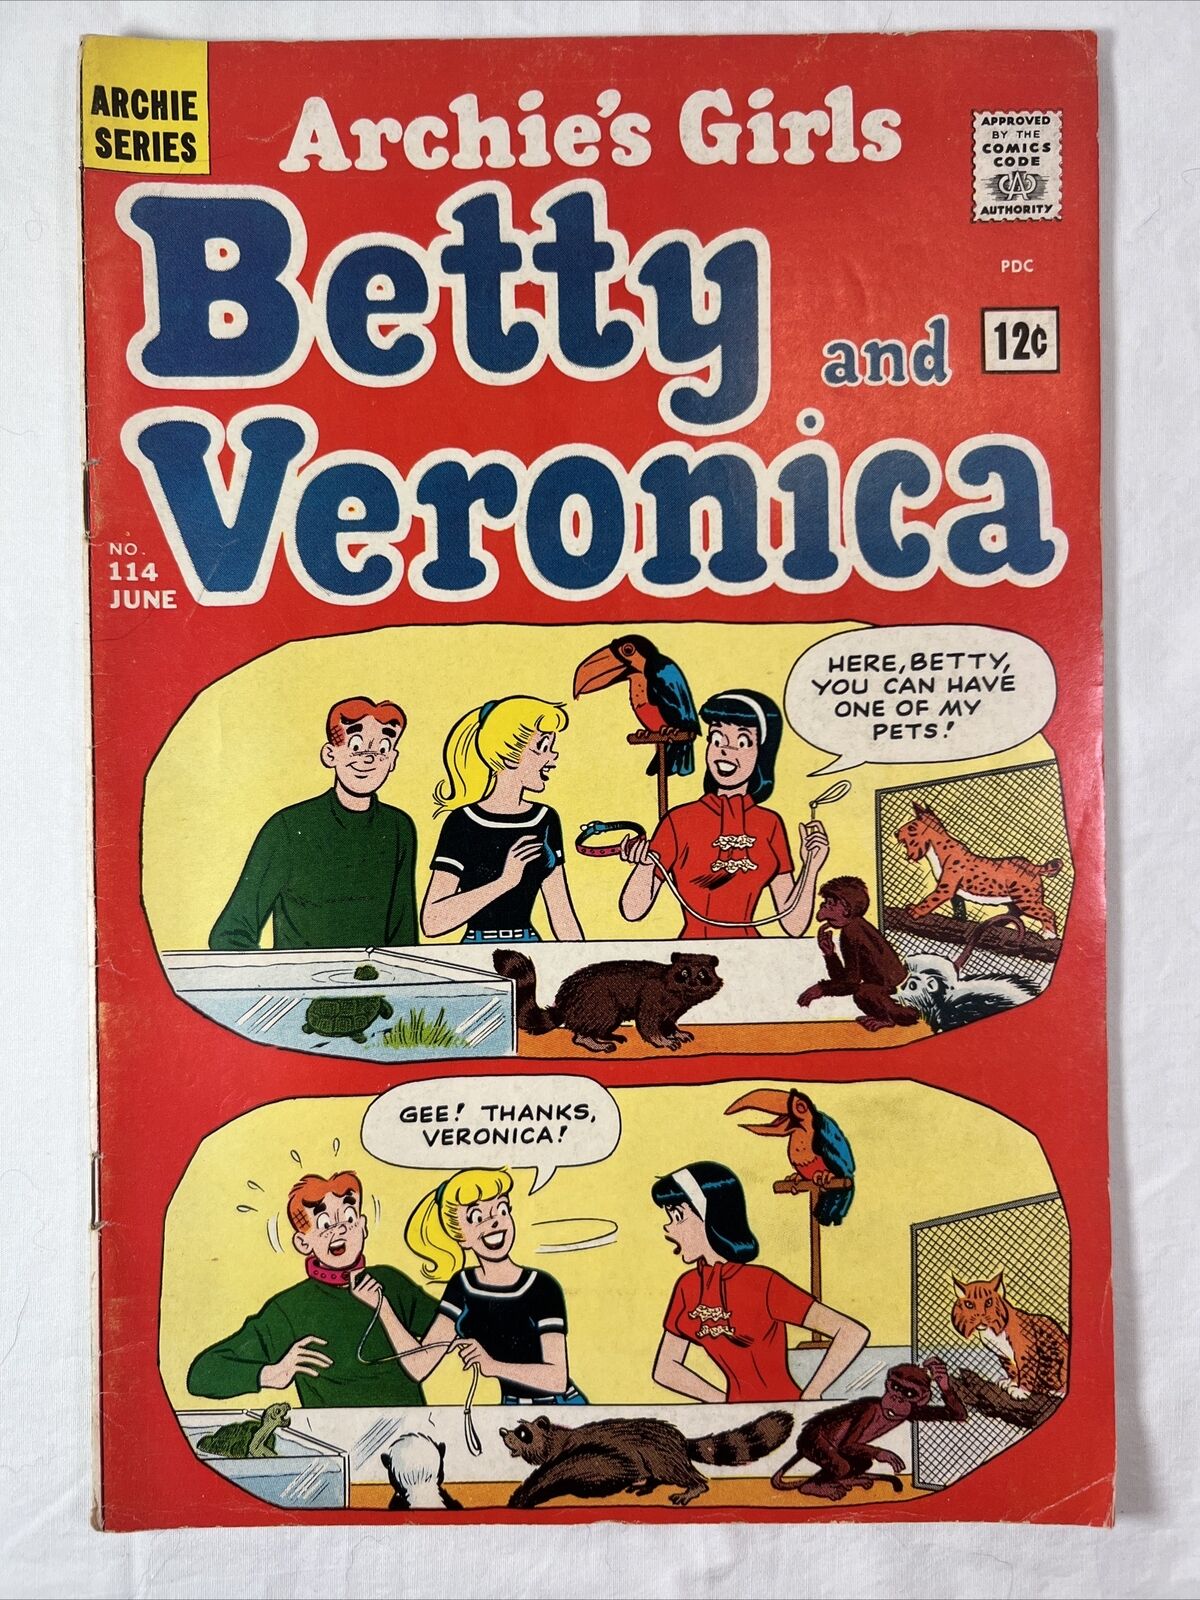 Archie's Girls Betty and Veronica #114 (1963) Human Pet Cover Nice Copy